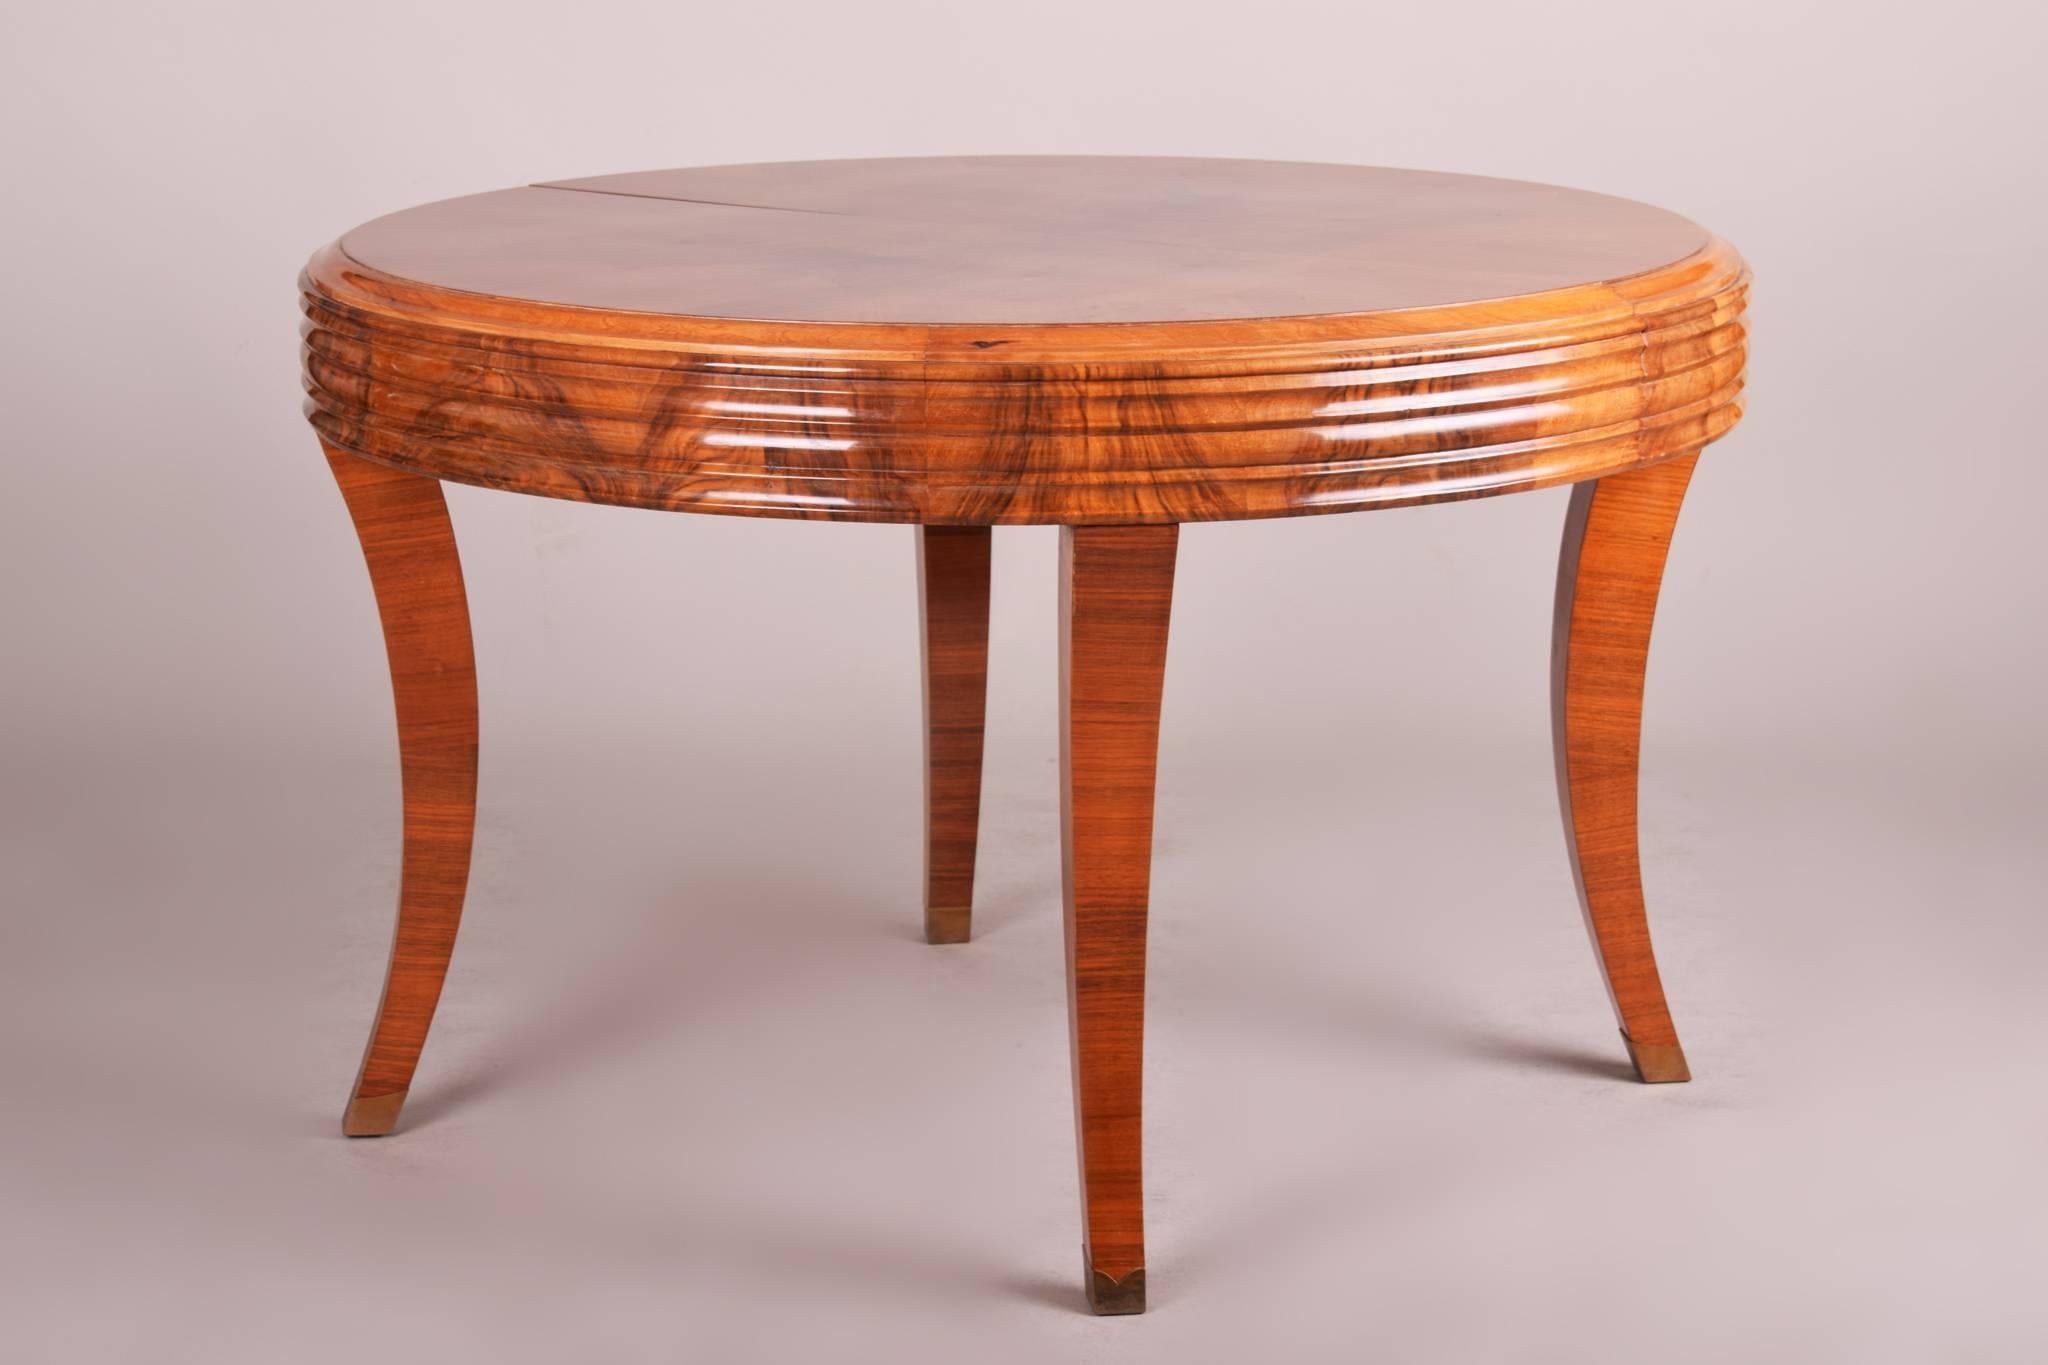 Art Deco extendable dining table
Material: Walnut
Completely restored.
Surface polished by piano lacquers to the high gloss. 
Dimensions after extending 187cm.

We guarantee safe a the cheapest air transport from Europe to the whole world within 7